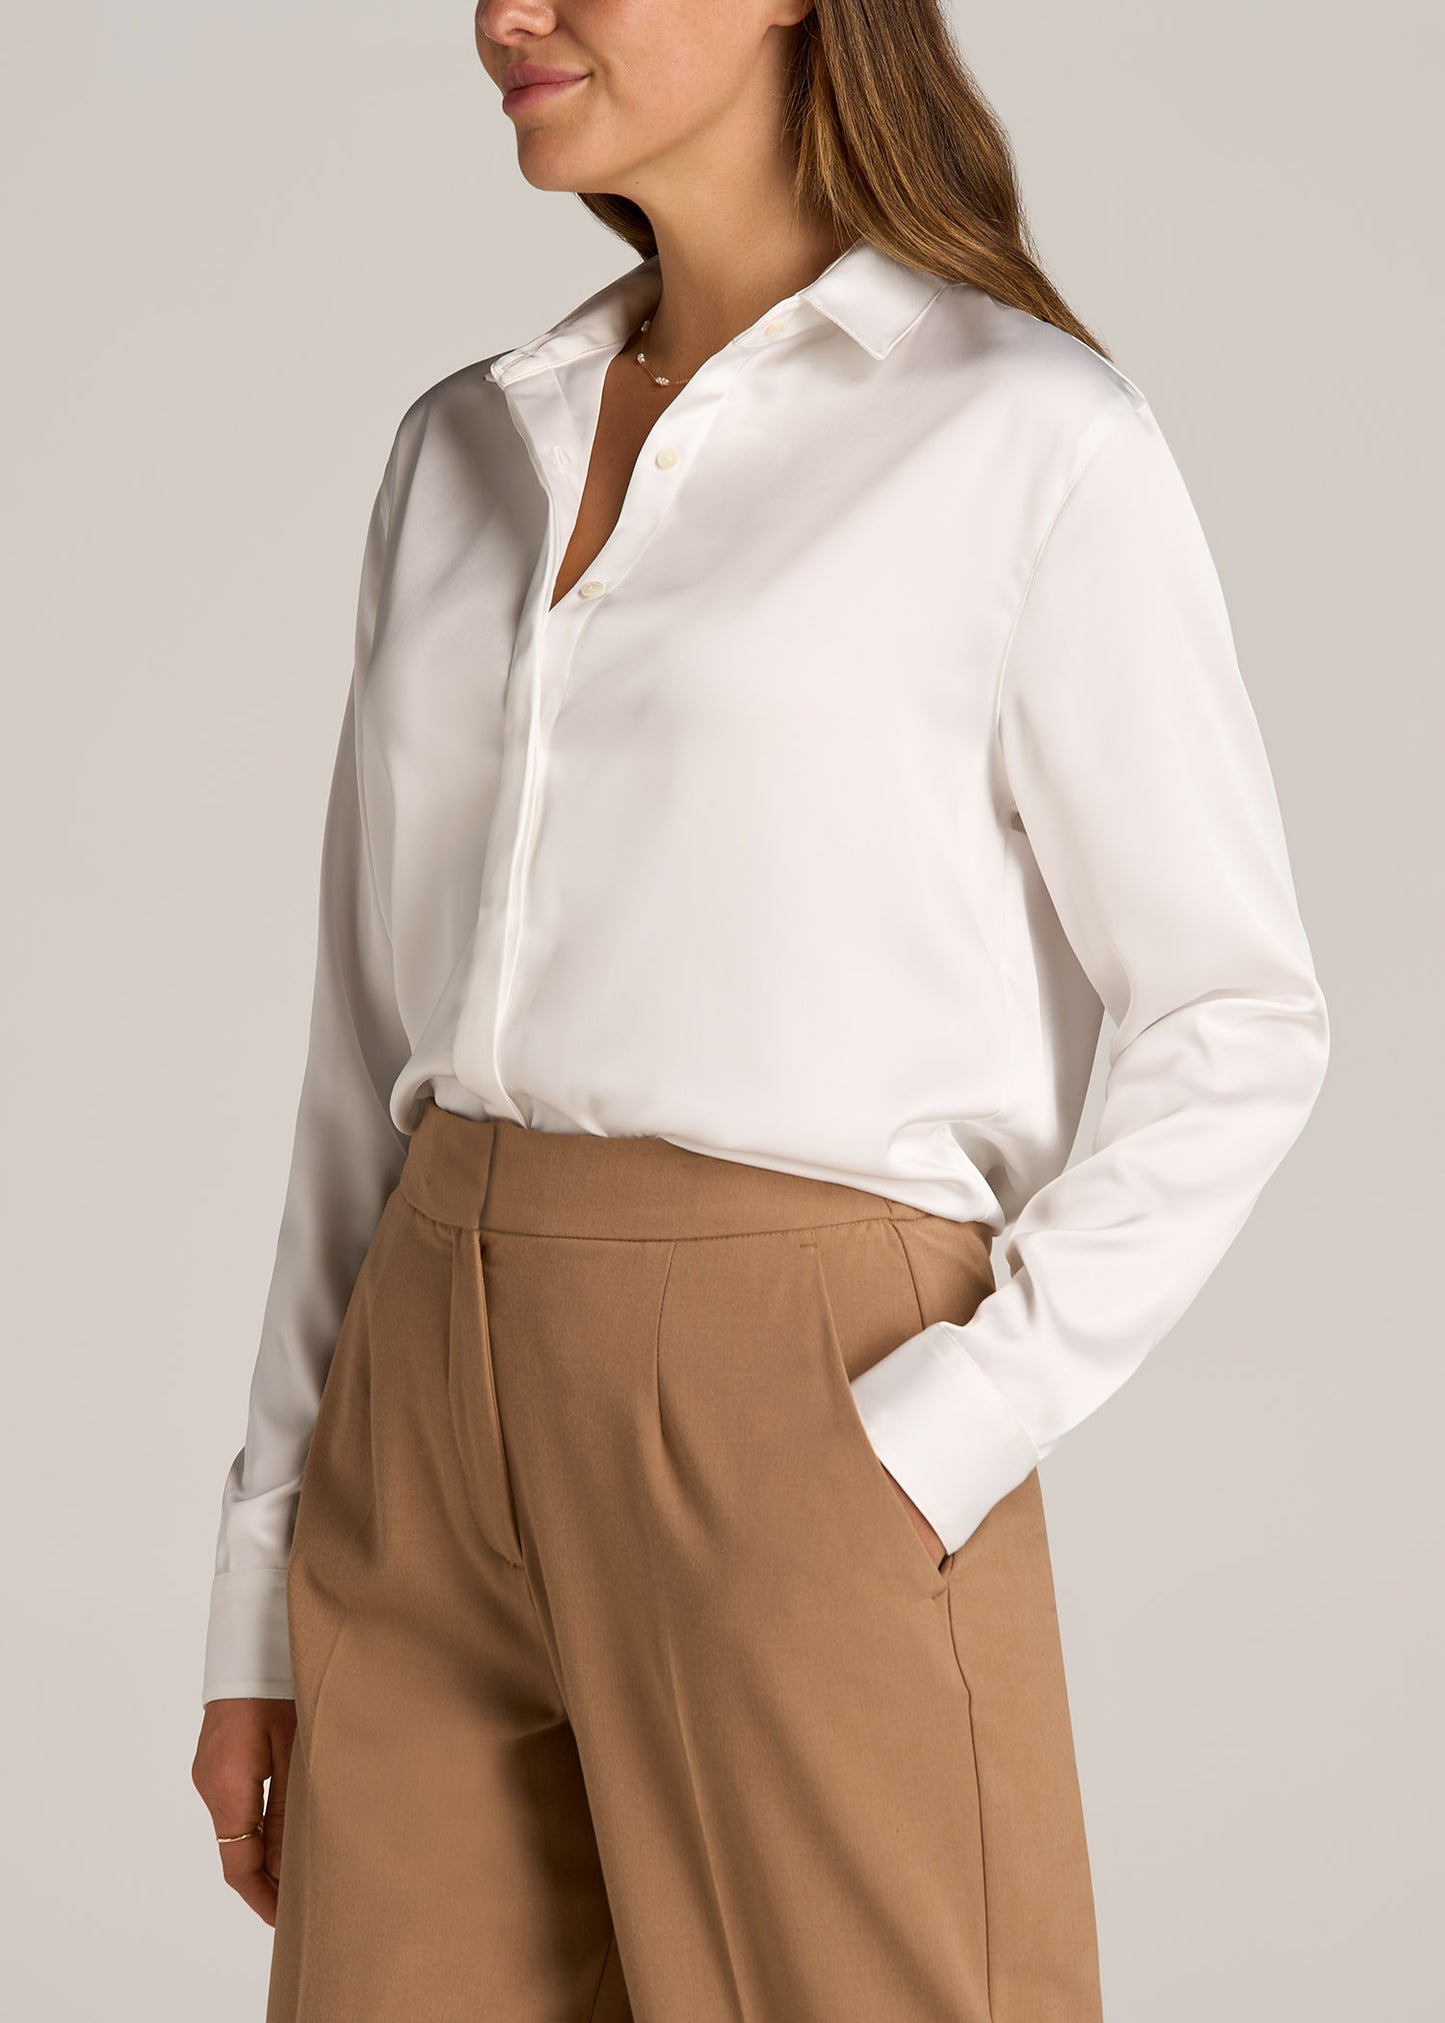 Relaxed Button Up Tall Women’s Blouse in Pearl White